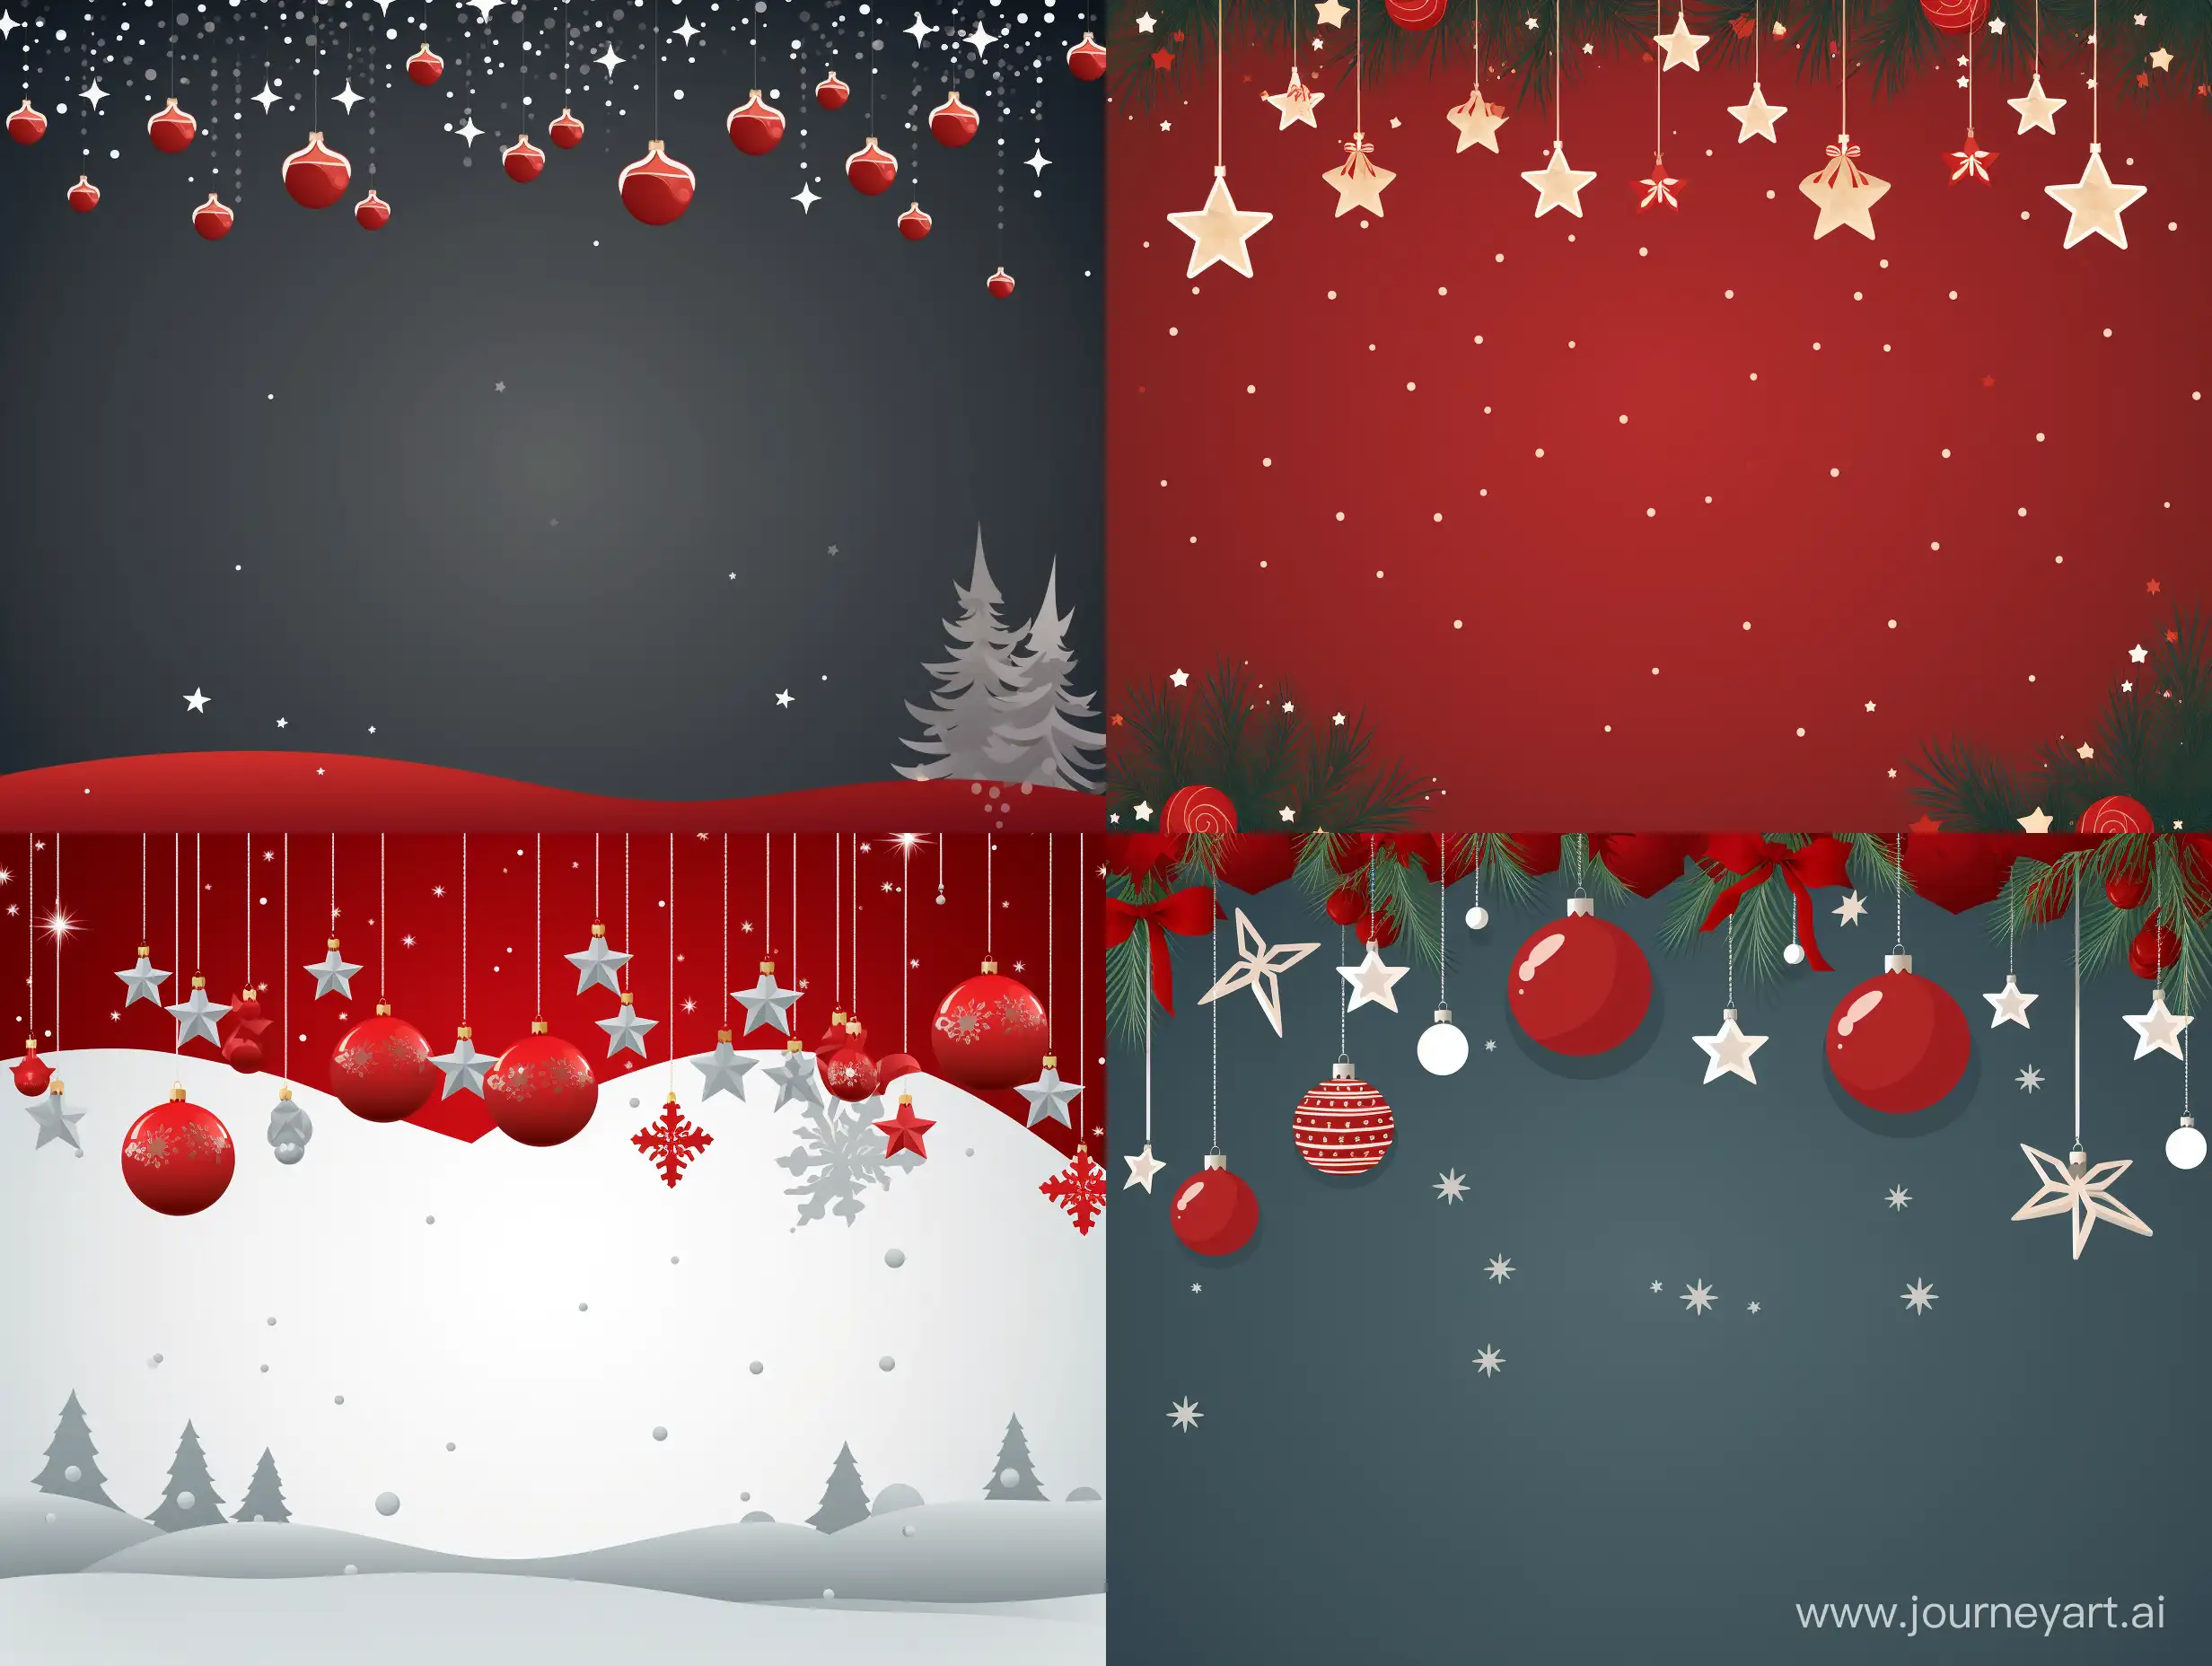 Modern-Minimal-Christmas-Greetings-Card-with-Festive-Ornaments-and-Gifts